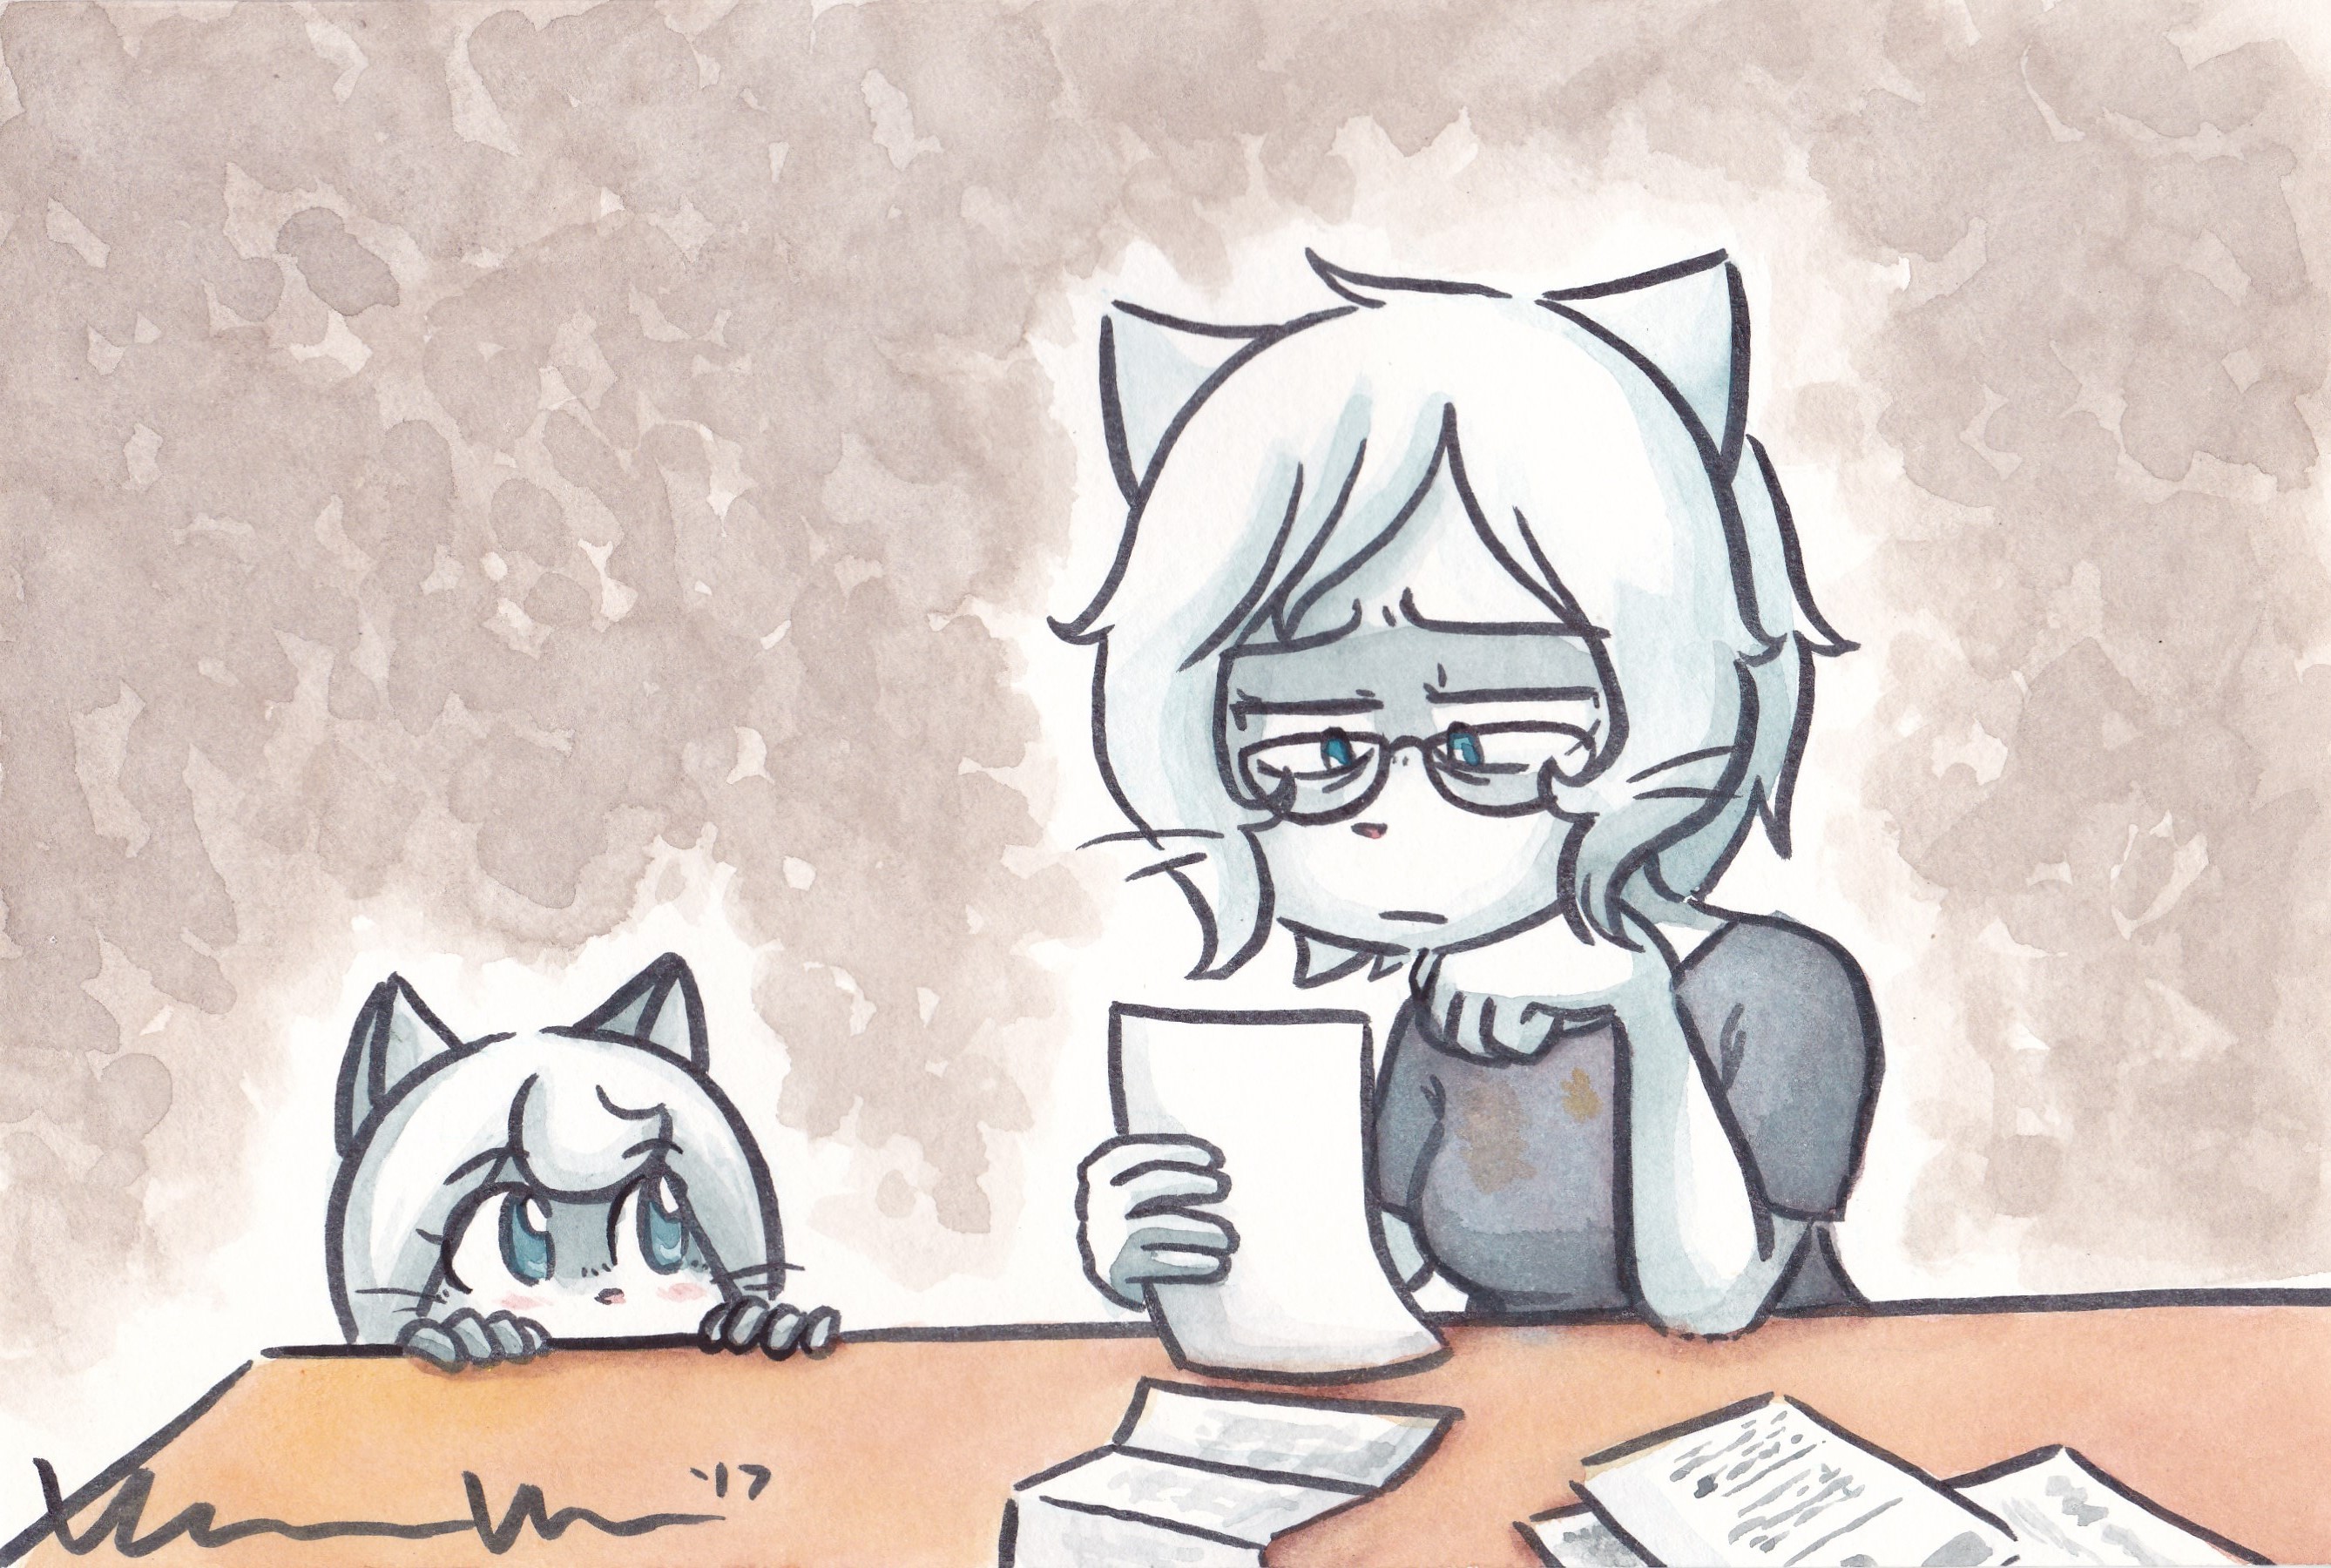 Candybooru image #12767, tagged with Adult_Lucy Kitten Lucy MikexLucy Taeshi_(Artist) commission watercolor